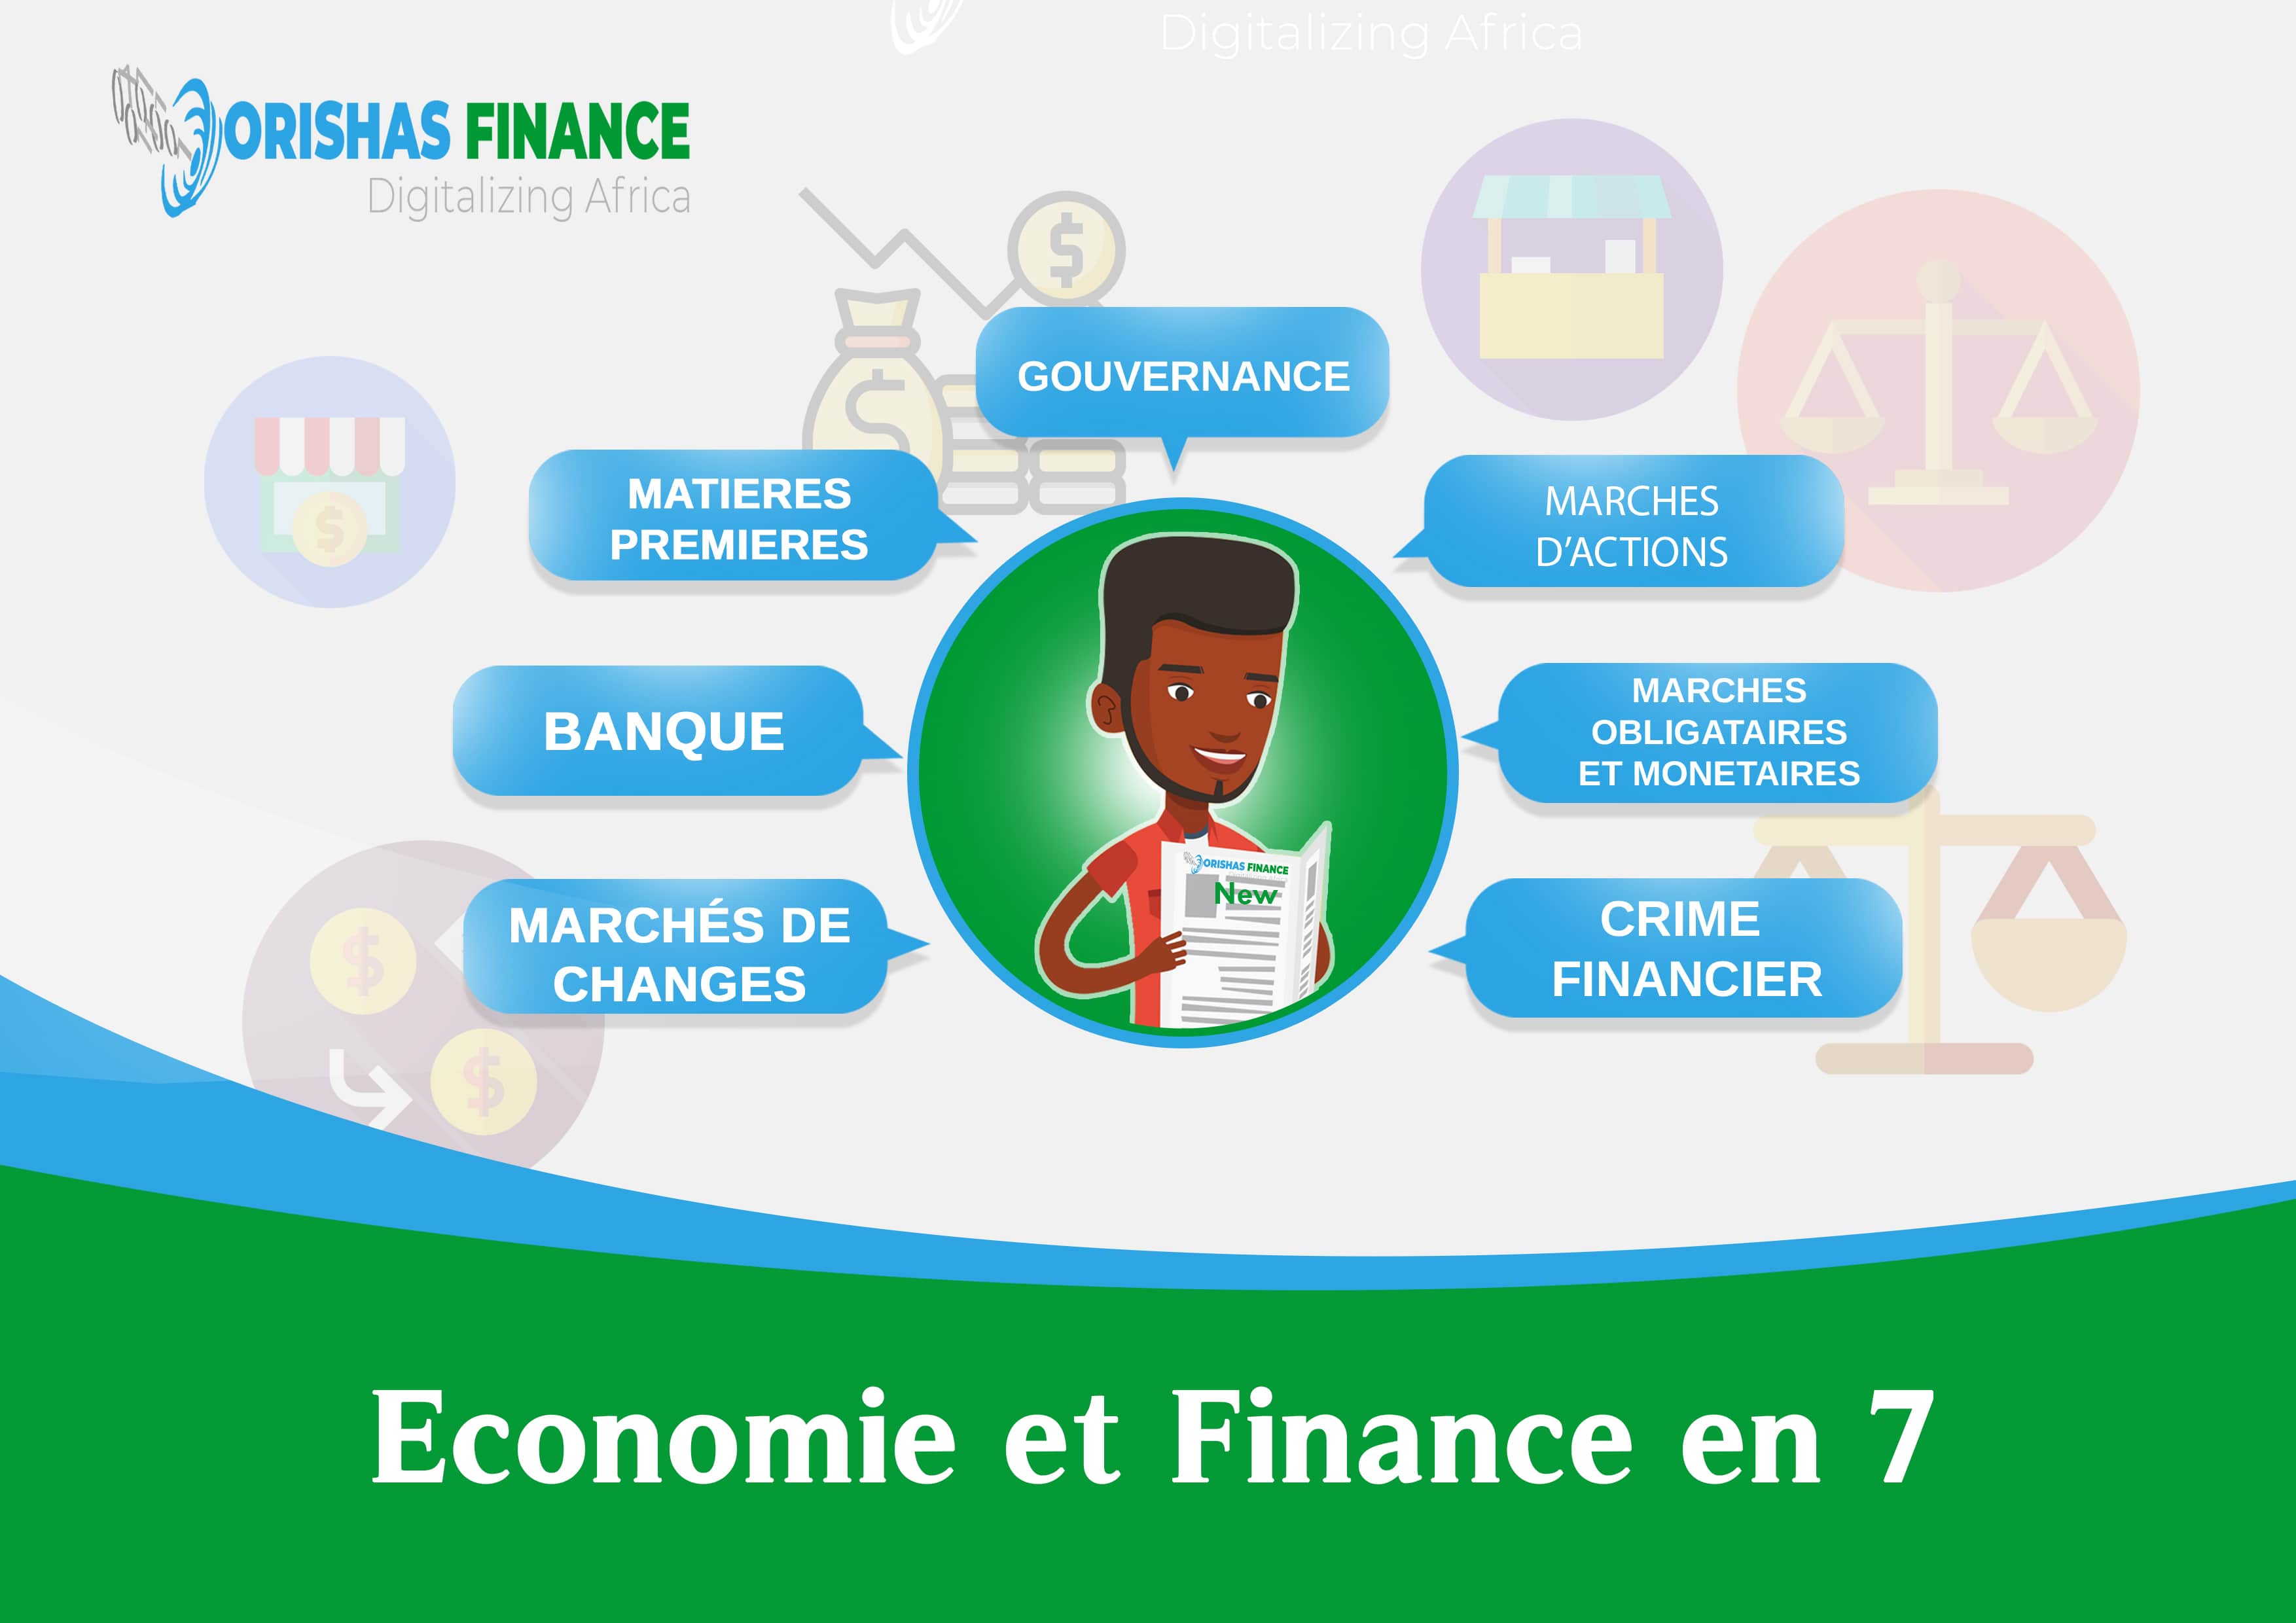  Economy and Finance in 7 from March 22 to 26, 2021 